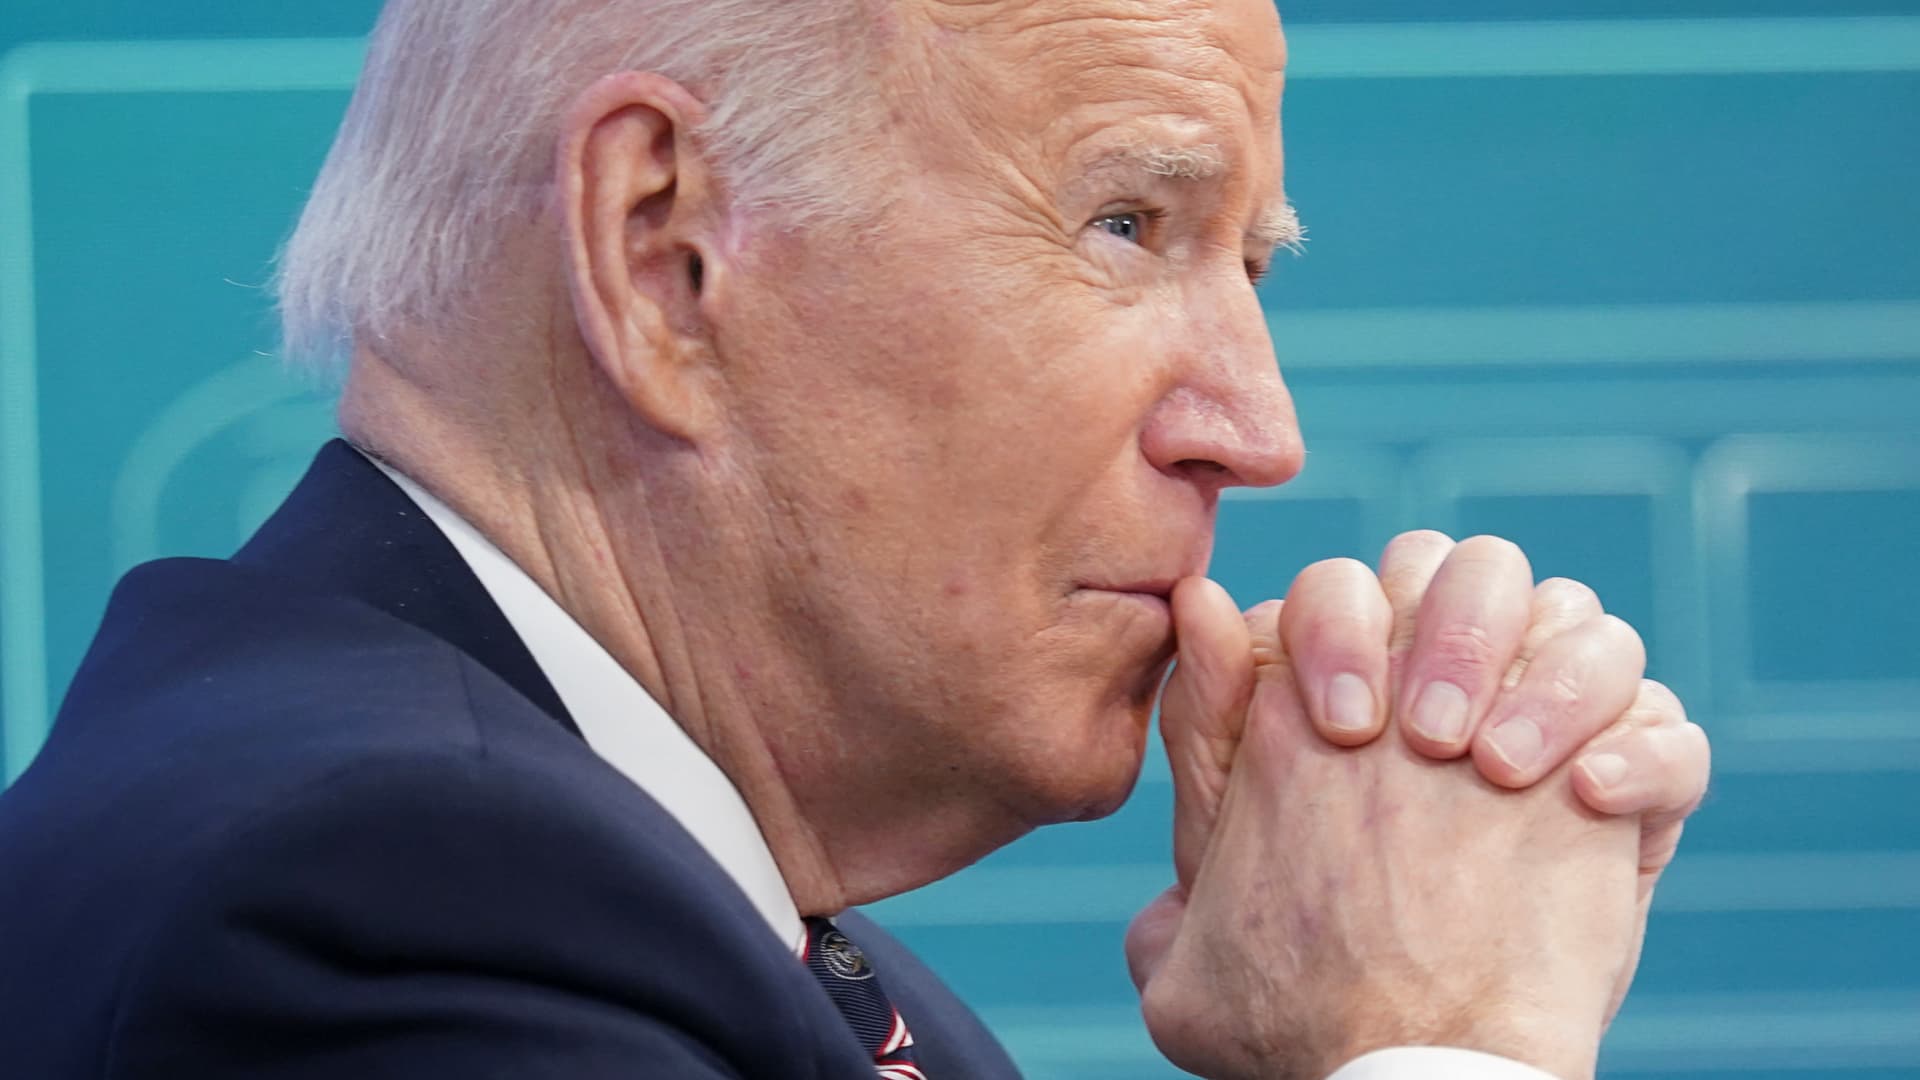 U.S. President Joe Biden listens during a virtual roundtable on securing critical minerals at the White House in Washington, February 22, 2022.